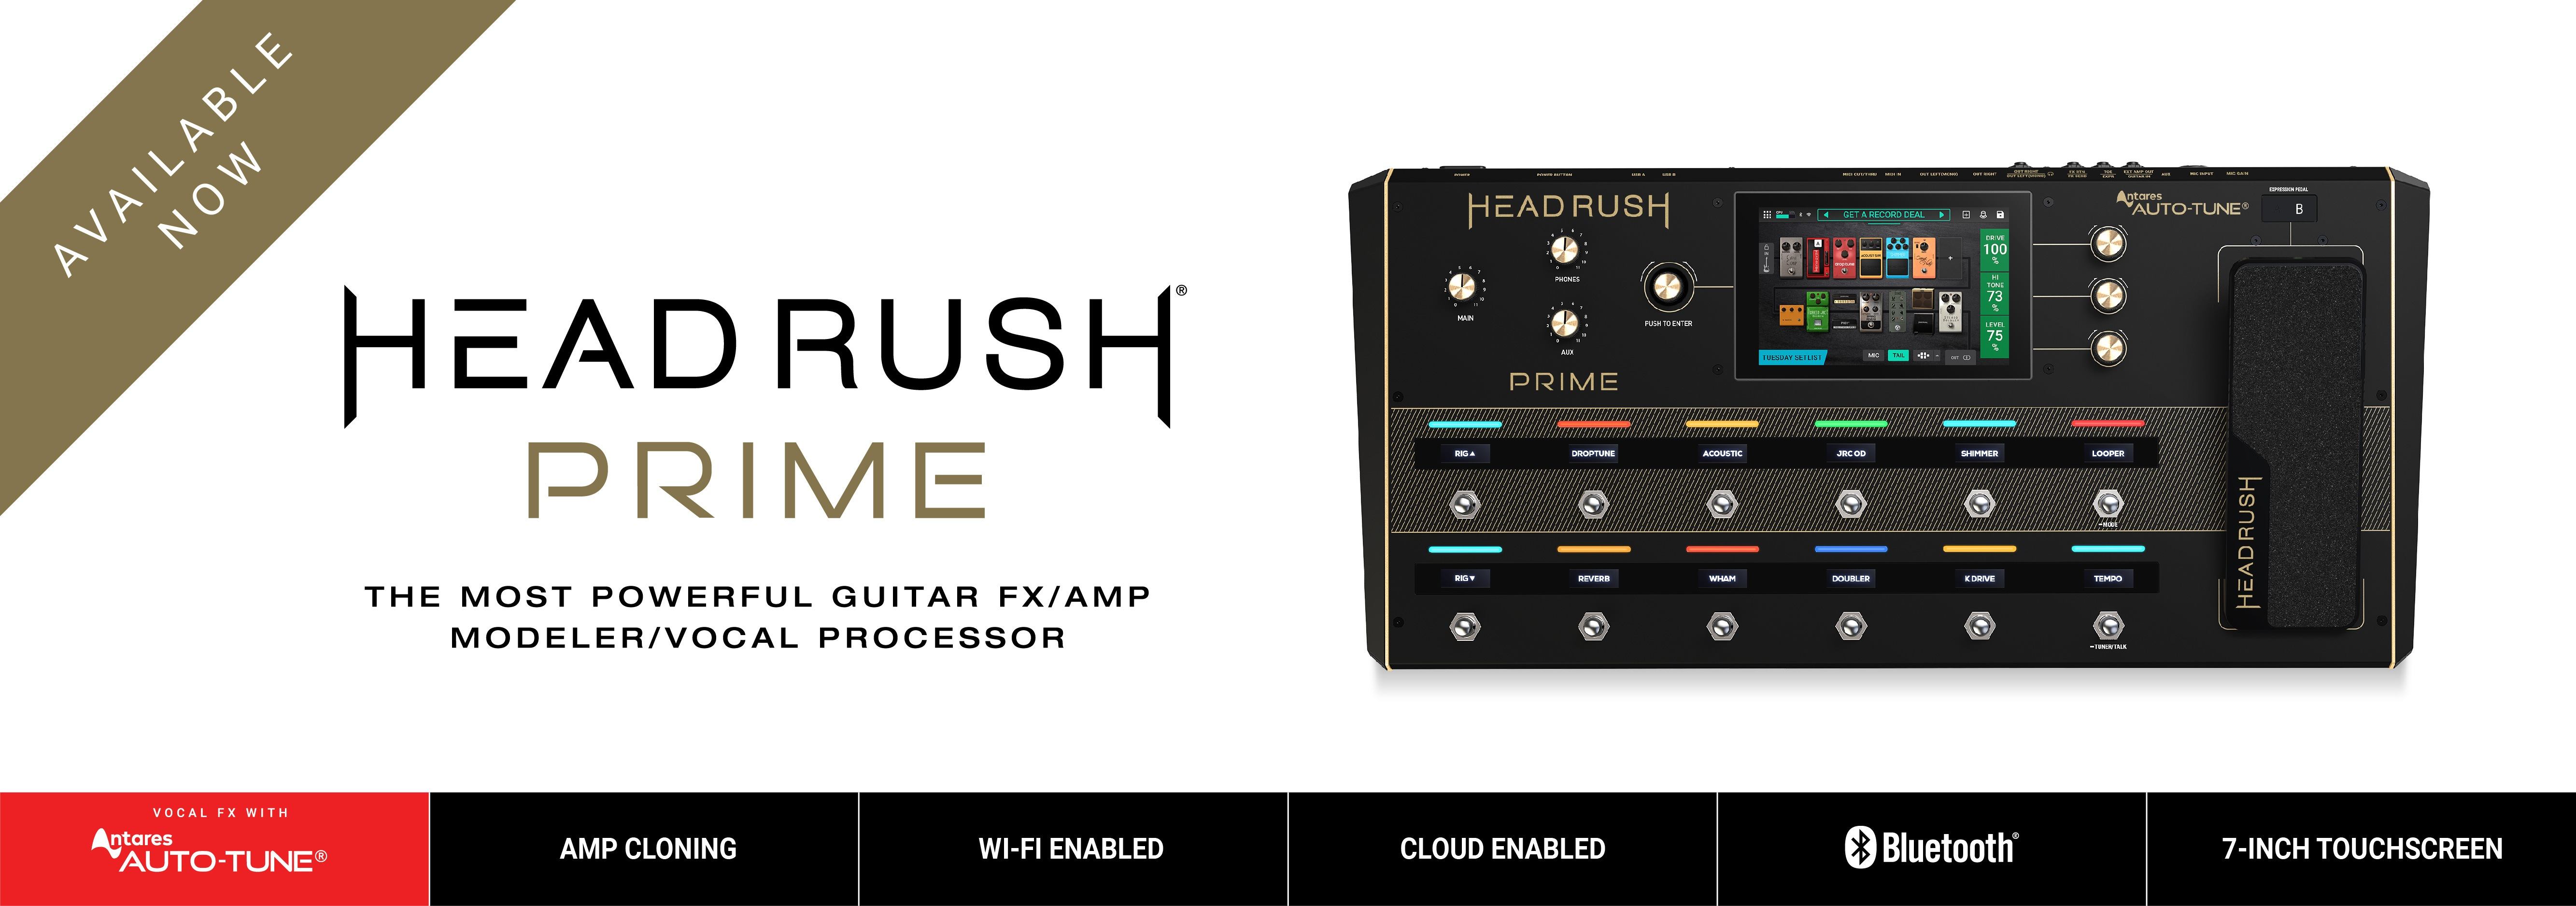 Headrush Prime Now Available